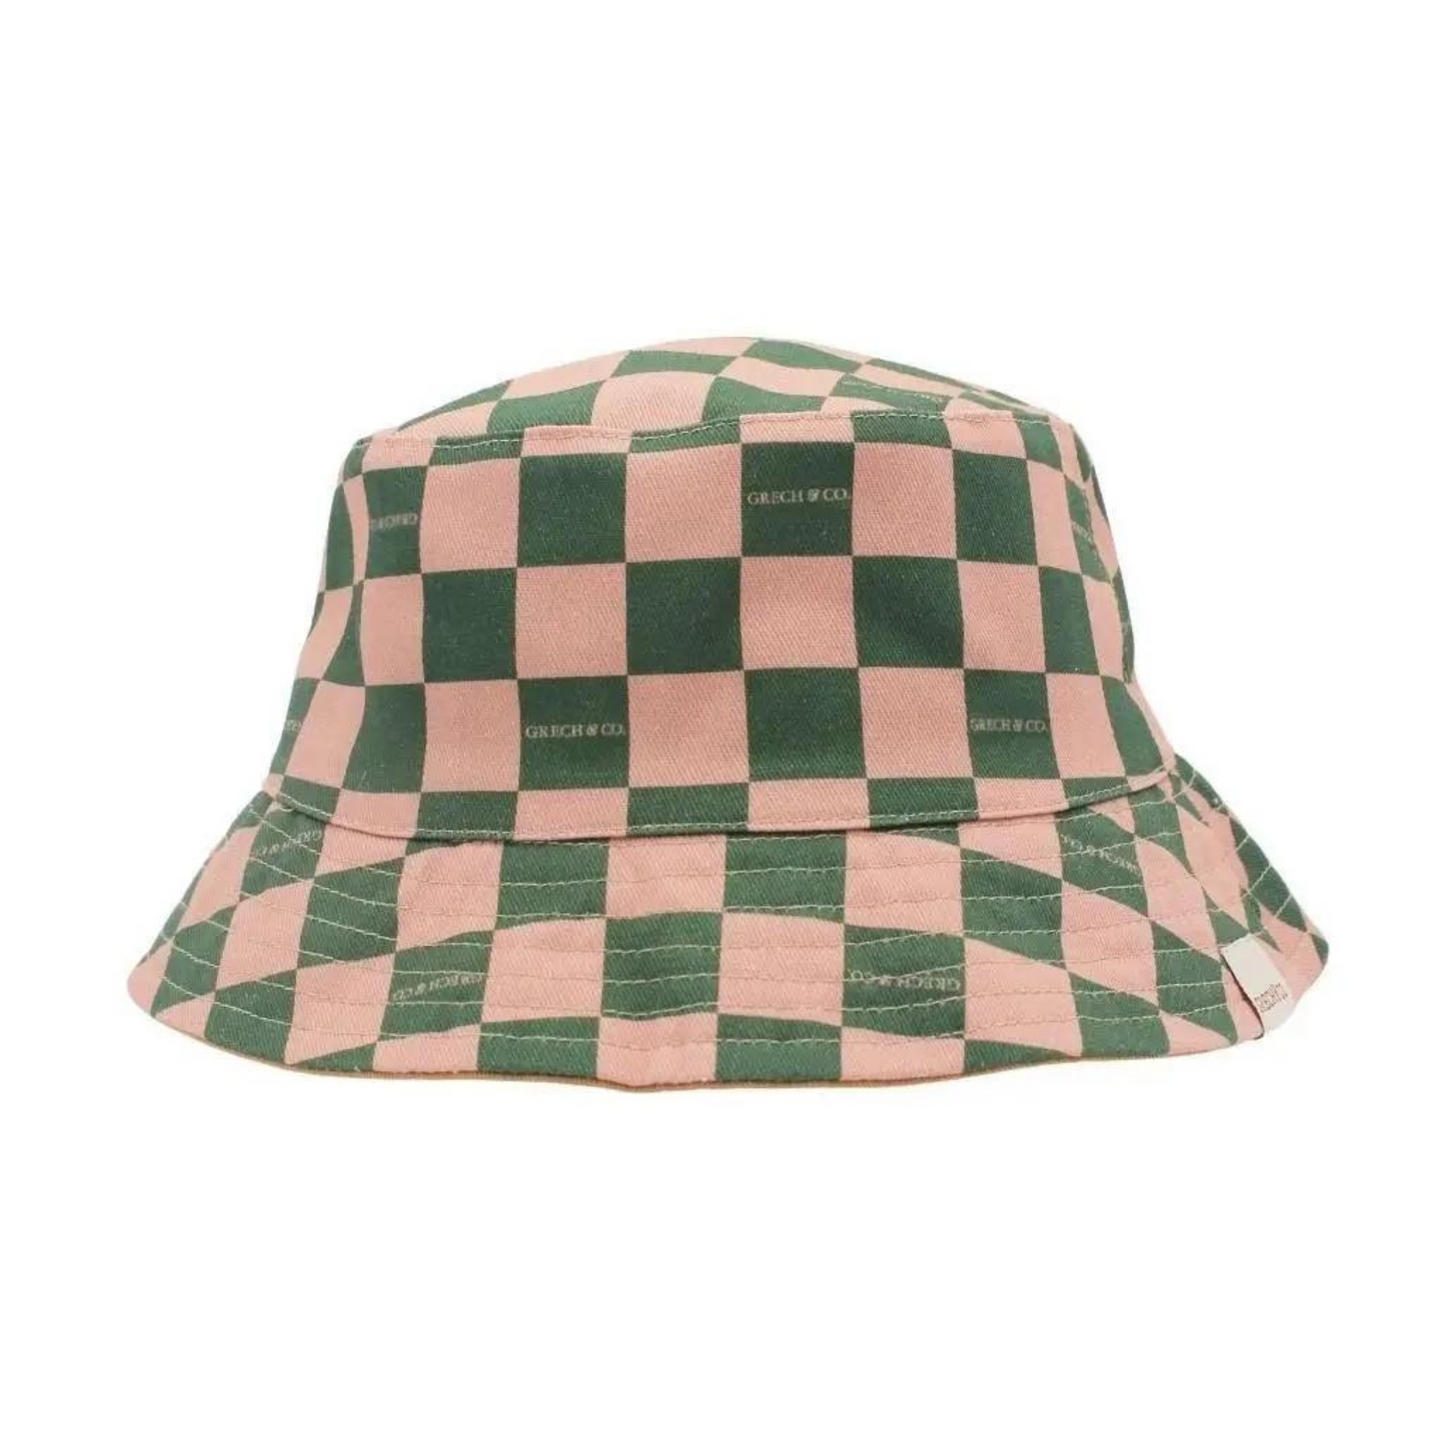 Reversible Bucket Hat in Sunset and Orchard Checks